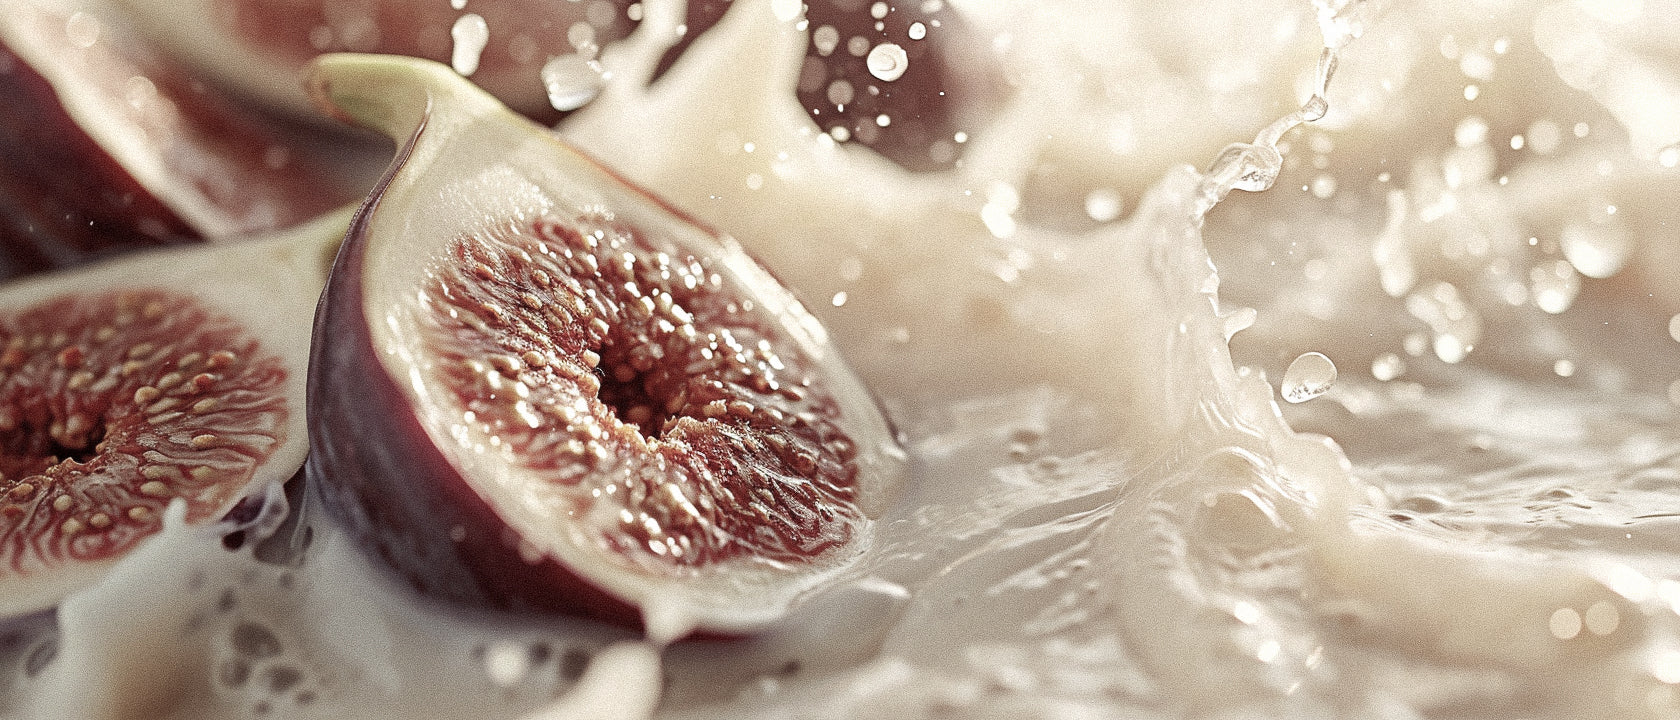 The Art and Science behind Fig Notes in Perfume: An Expert's Analysis